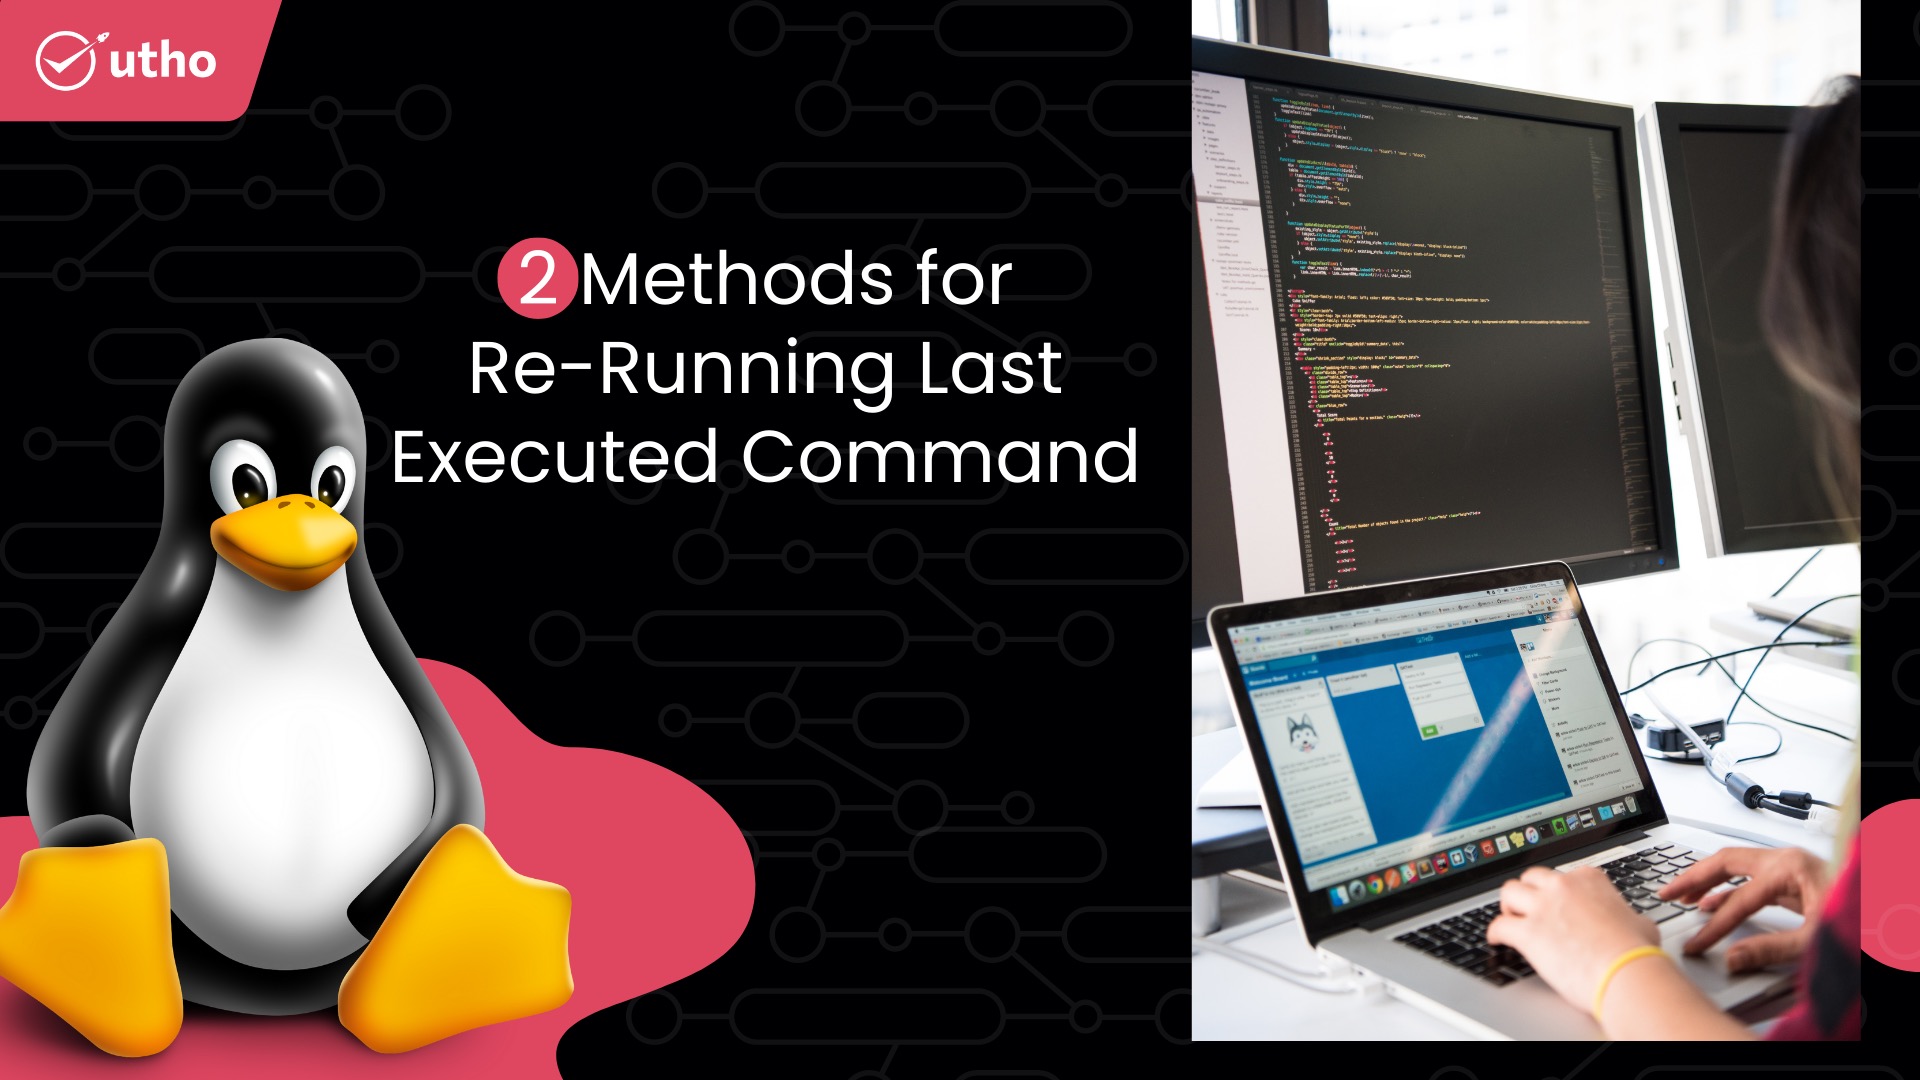 2 Methods for Re-Running Last Executed Commands in Linux